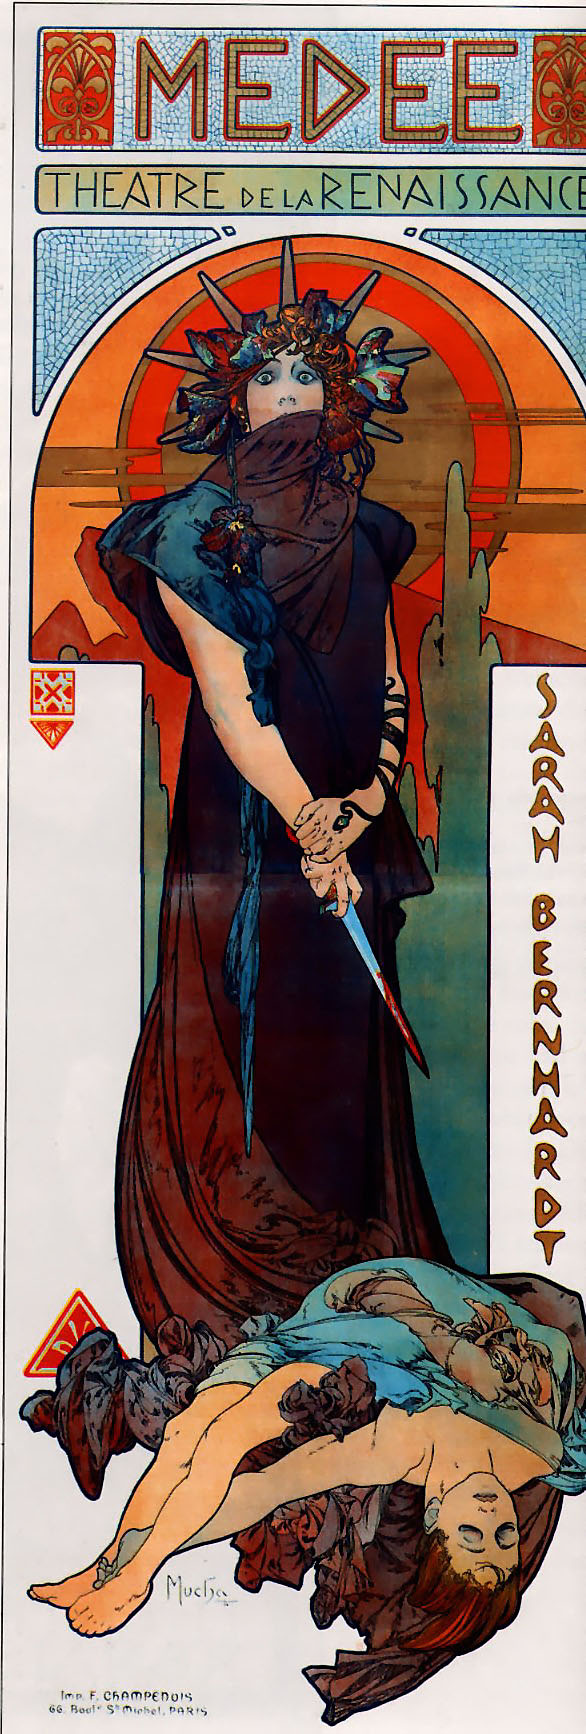 An early 20th century poster for the play Medea. At the top is the title "Medée", and below is written "Théatre de la Renaissance". A woman wearing a pointed crown stands in the middle, holding a bloody dagger in her left hand, and wearing a dark robe with a scarf which covers her mouth. To her right is written the name of the actress, "Sarah Bernhardt", and on the ground lies a young man in a tunic with his eyes closed. In the background the sky is red, and a deeper red sun frames the woman's head.